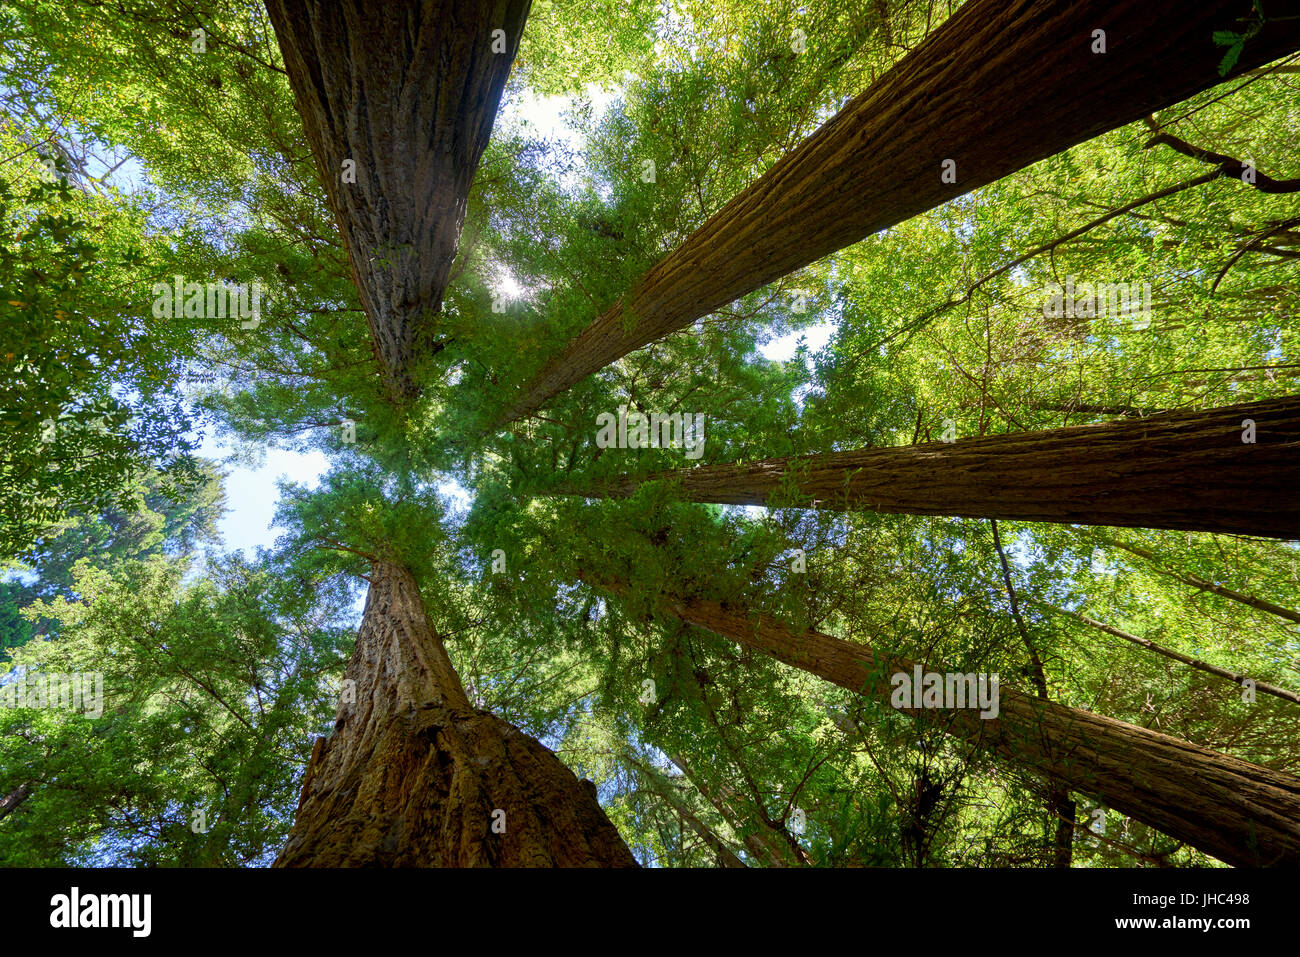 five giant redwood trees converging against a blue summer sky Stock Photo